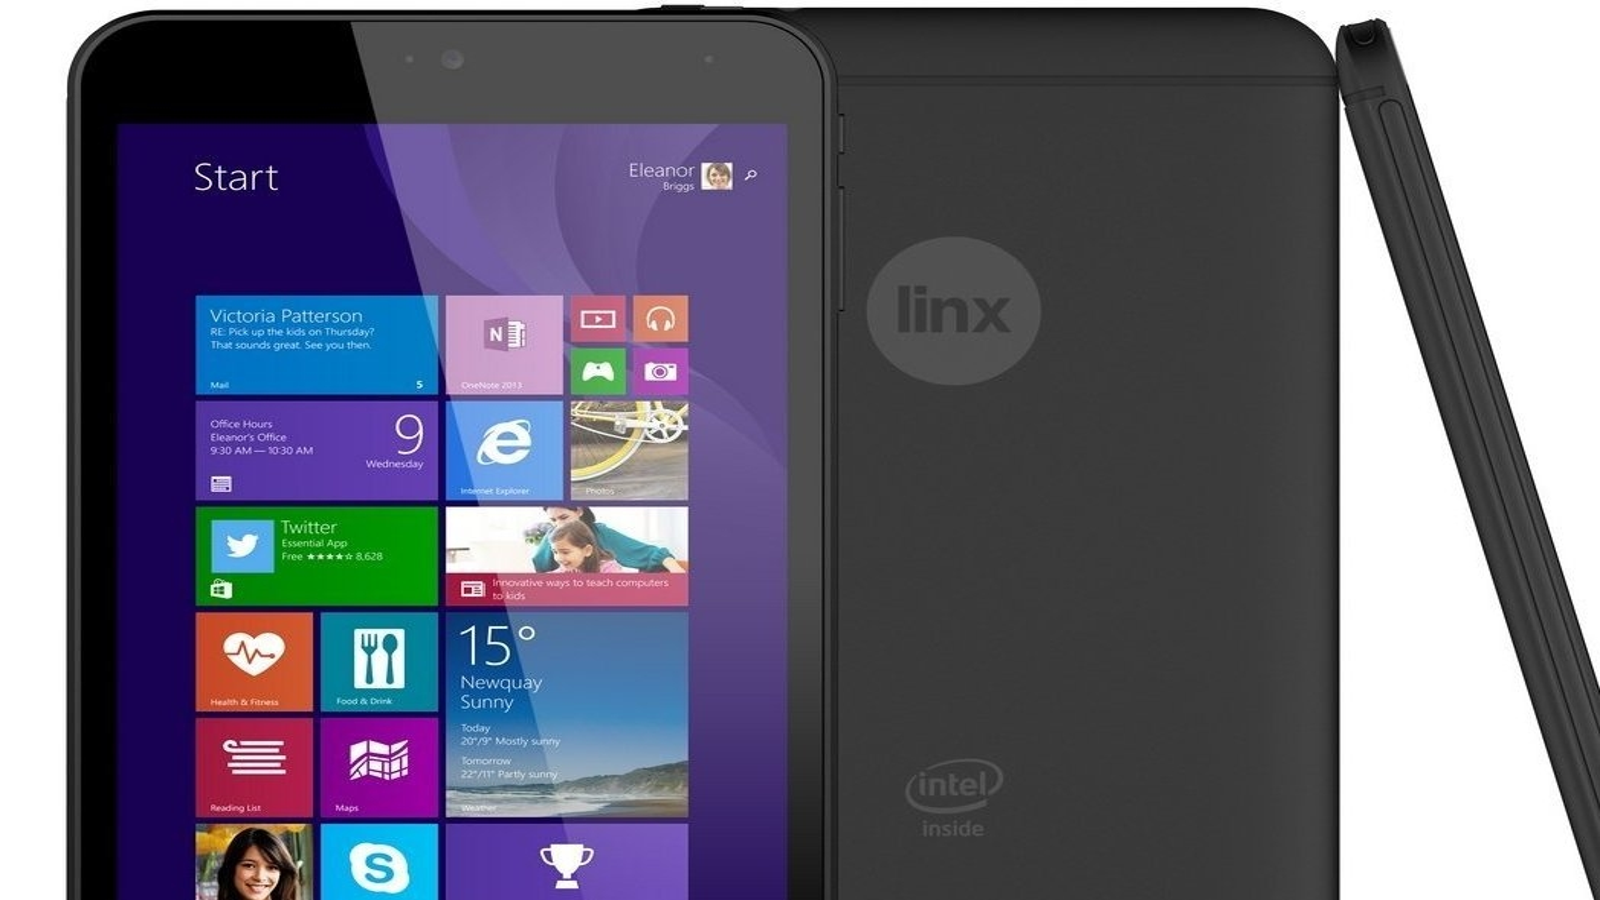 https://assetsio.reedpopcdn.com/digitalfoundry-2015-linx-8-review-the-sub-100-windows-tablet-experience-1420221899007.jpg?width=1600&height=900&fit=crop&quality=100&format=png&enable=upscale&auto=webp